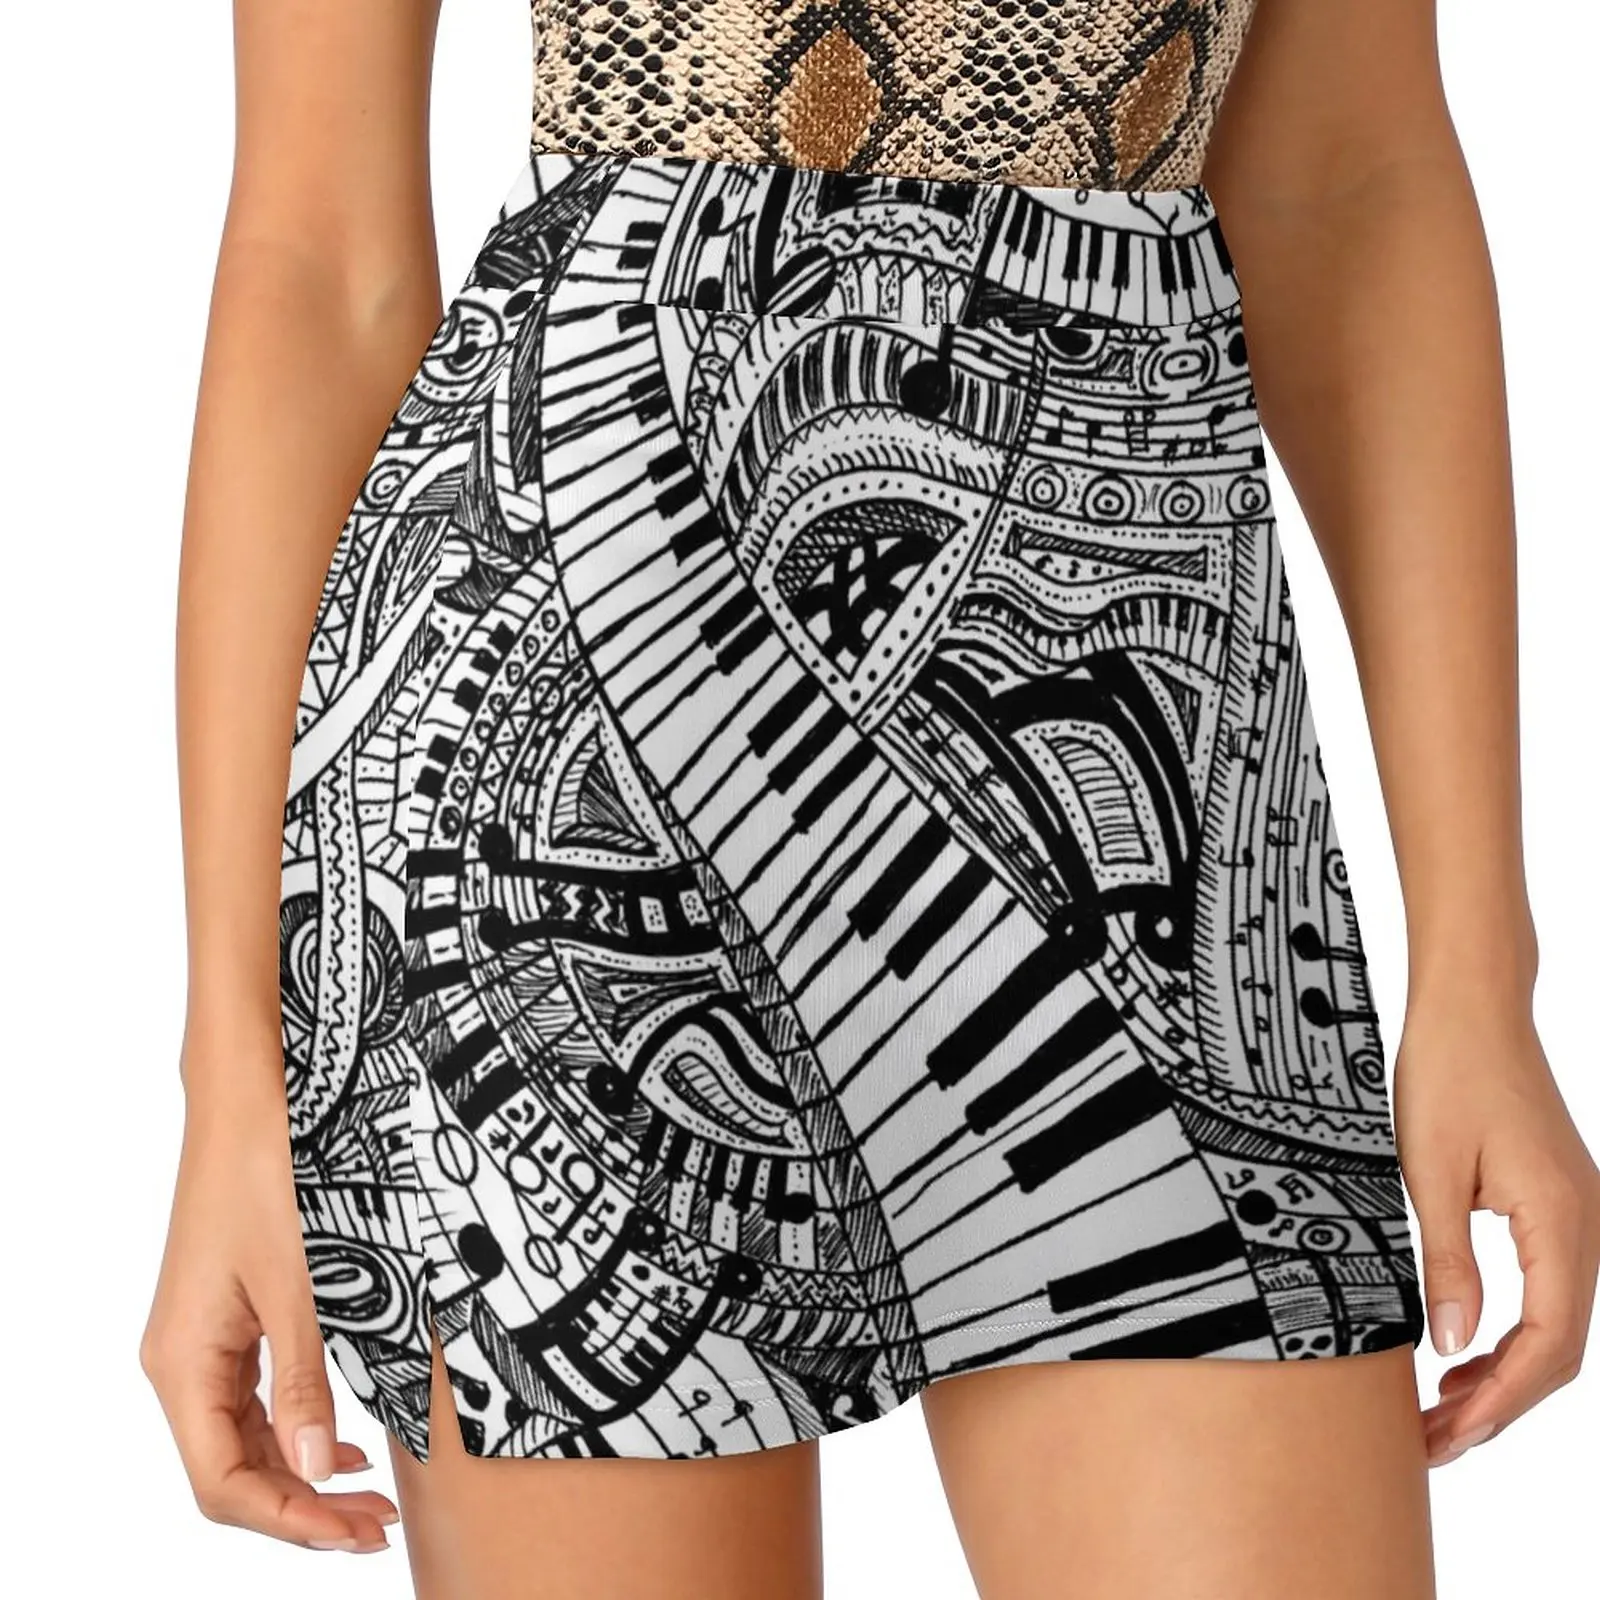 Classical music doodle with piano keyboard Light Proof Trouser Skirt novelty in clothes festival outfit women extreme mini dress leds projector light sunset lamp h alloween decorative starlit projection lamp with remote control supports u disk bt music player function